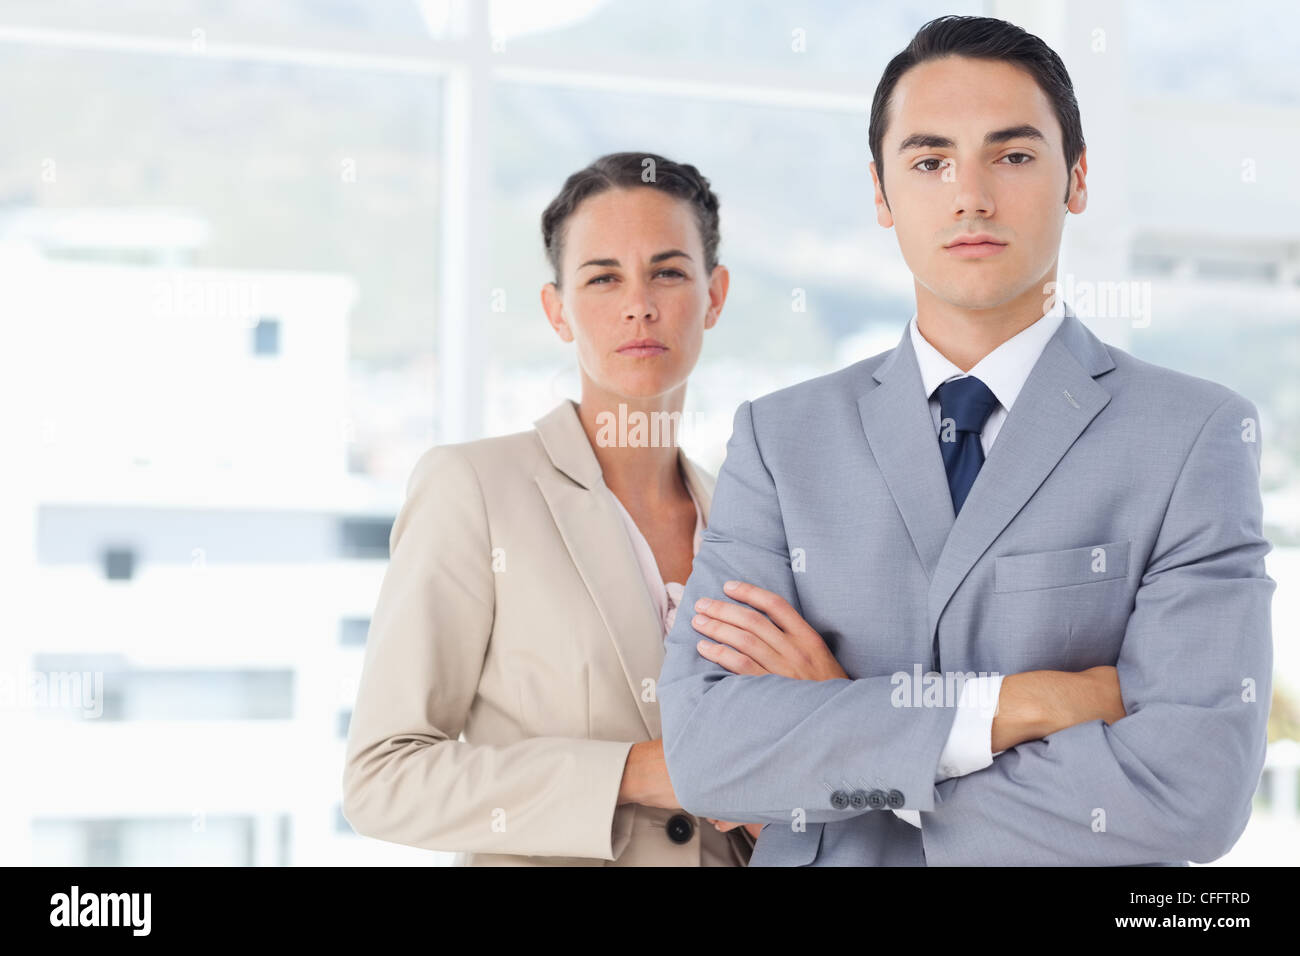 Confident businesspeople standing in front of a window Stock Photo